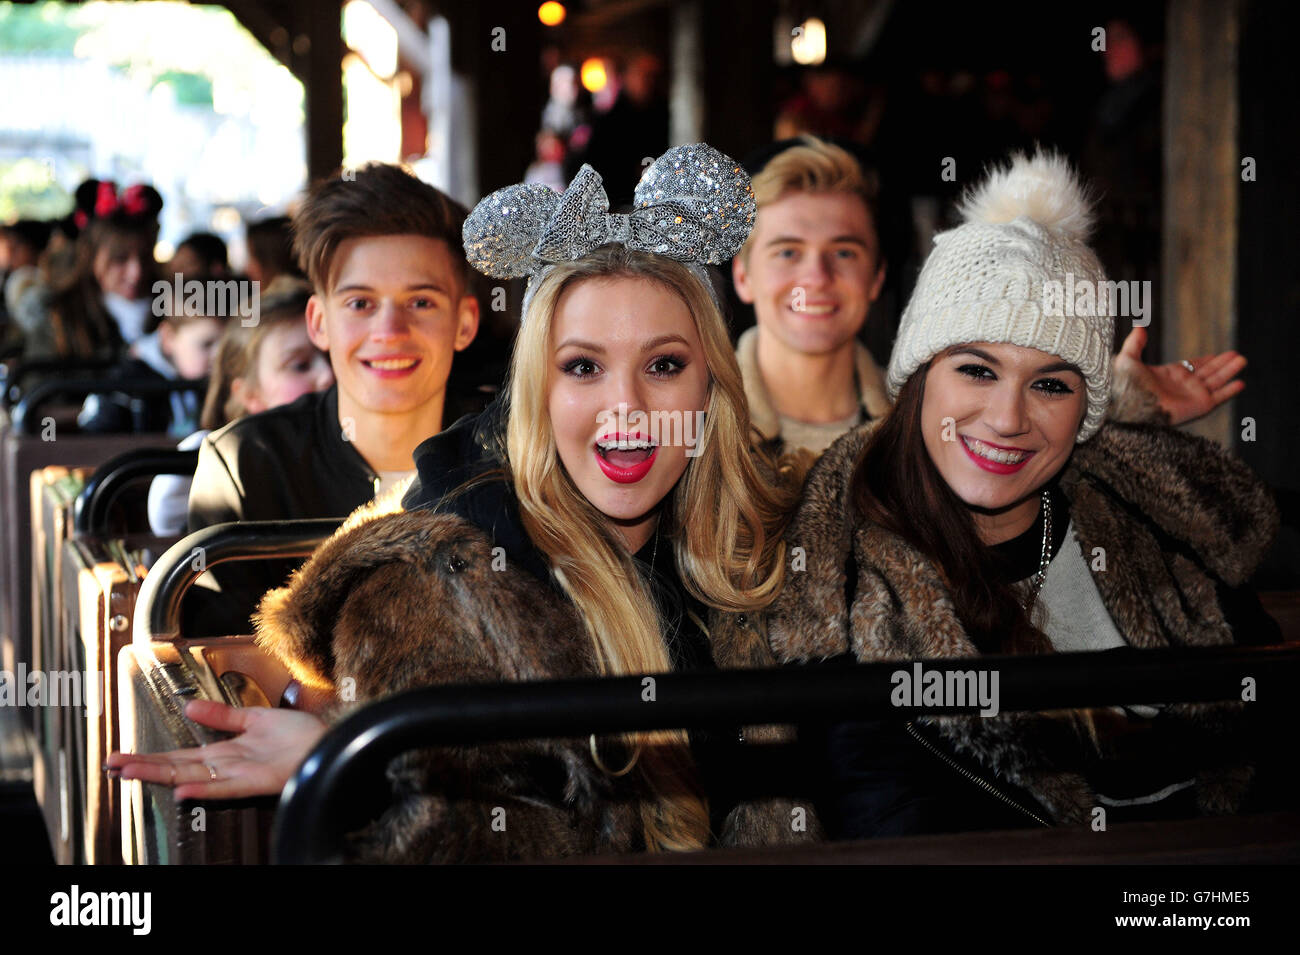 (Left to right) Charlie George, Mikey Russell-Bromley, Betsey-Blue English and Parisa Tarjomaniand of Only the Young, ride Thunder Mountain, during the charity trip to Disneyland Paris for under privileged children. Stock Photo